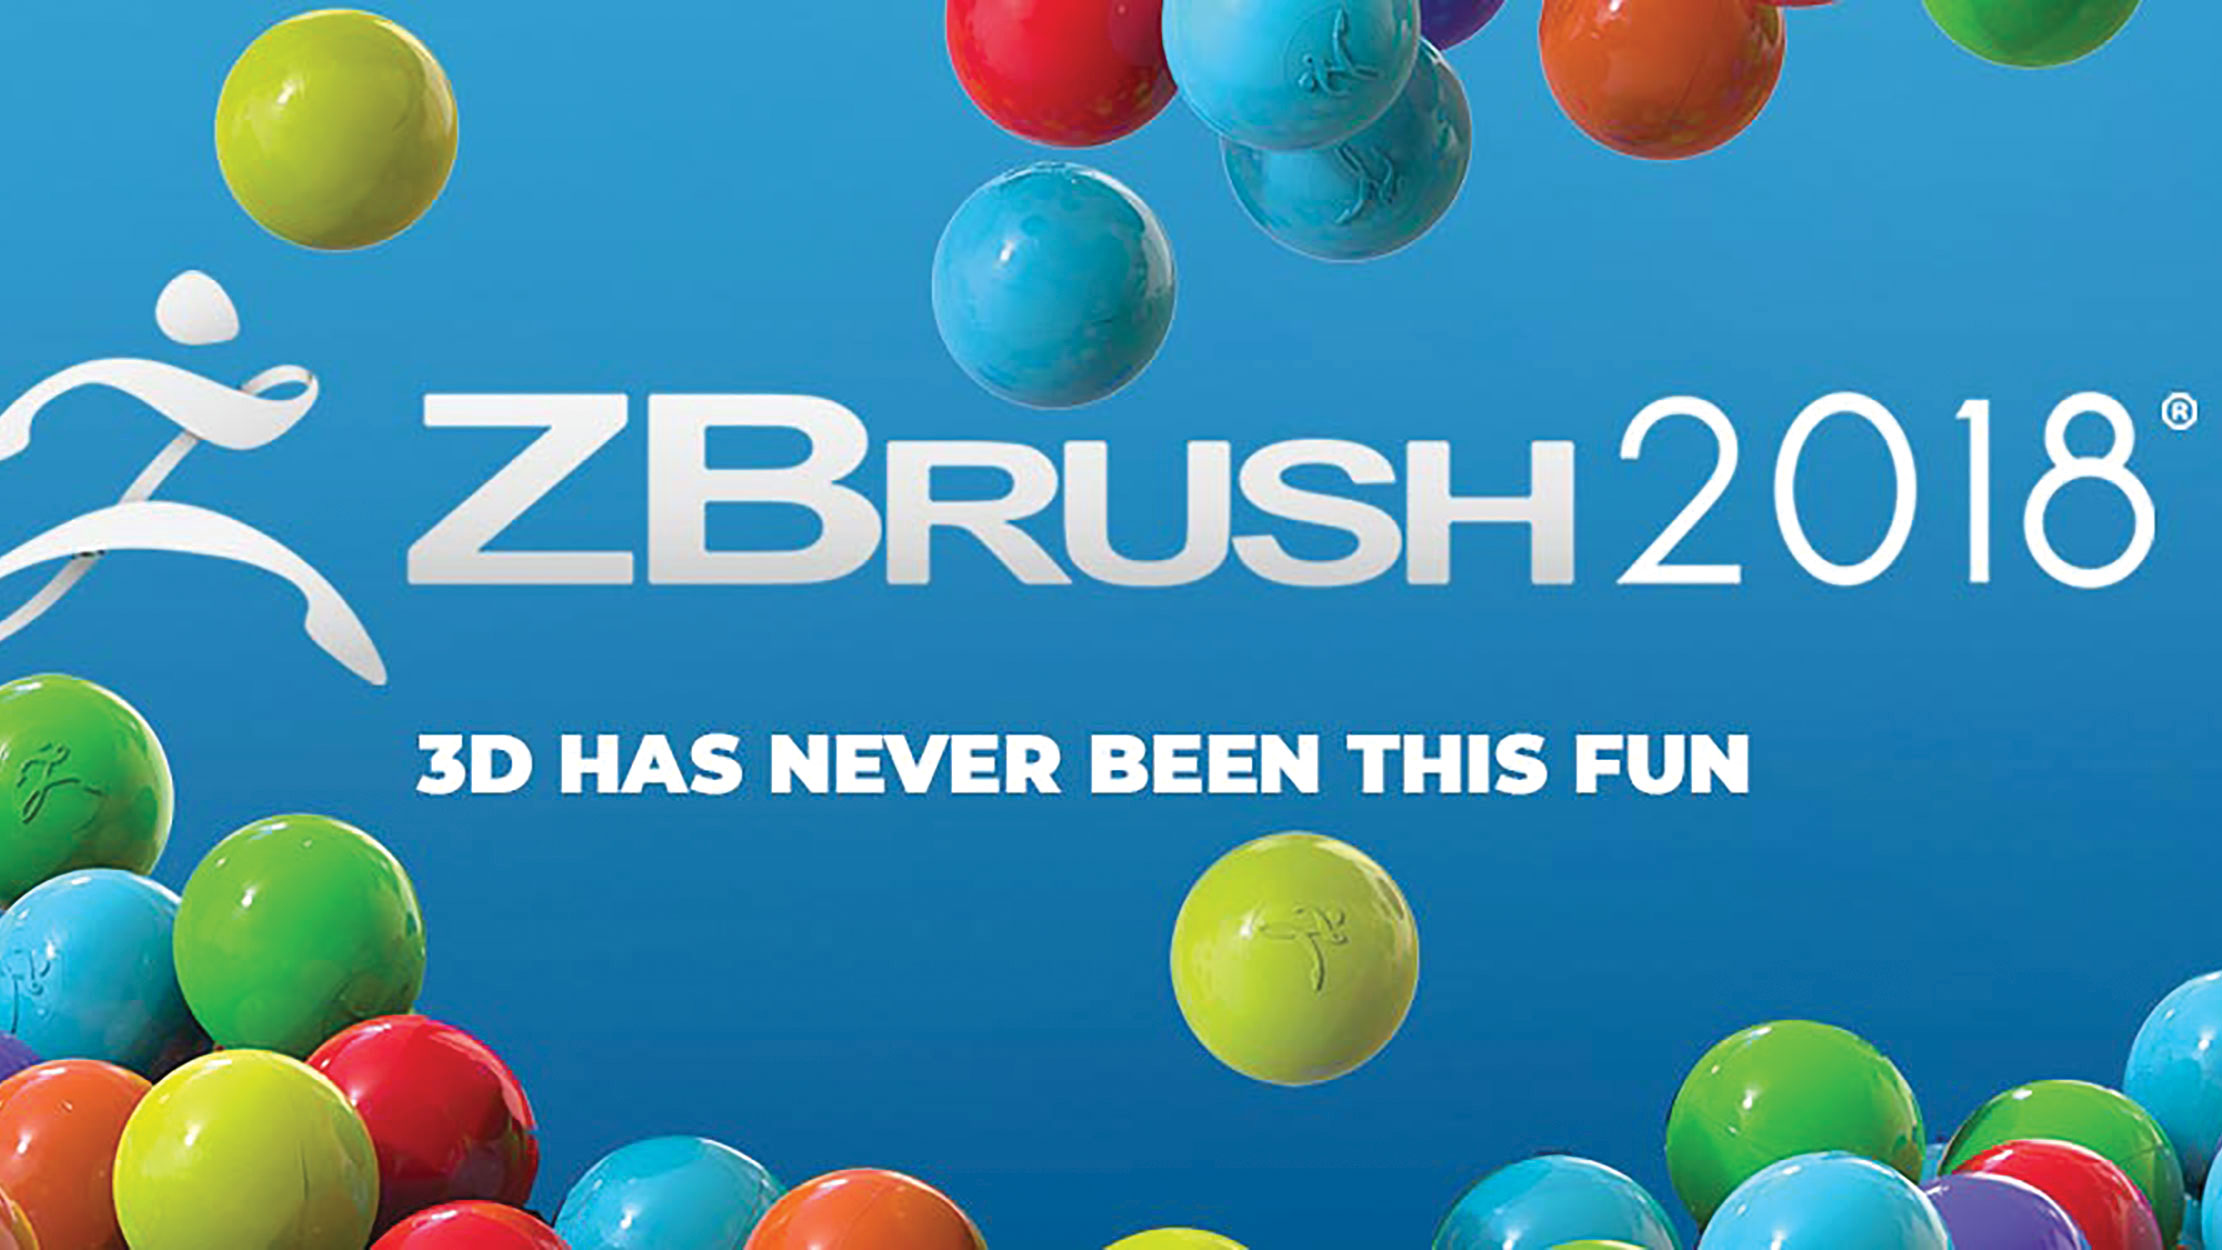 new features in zbrush 2018